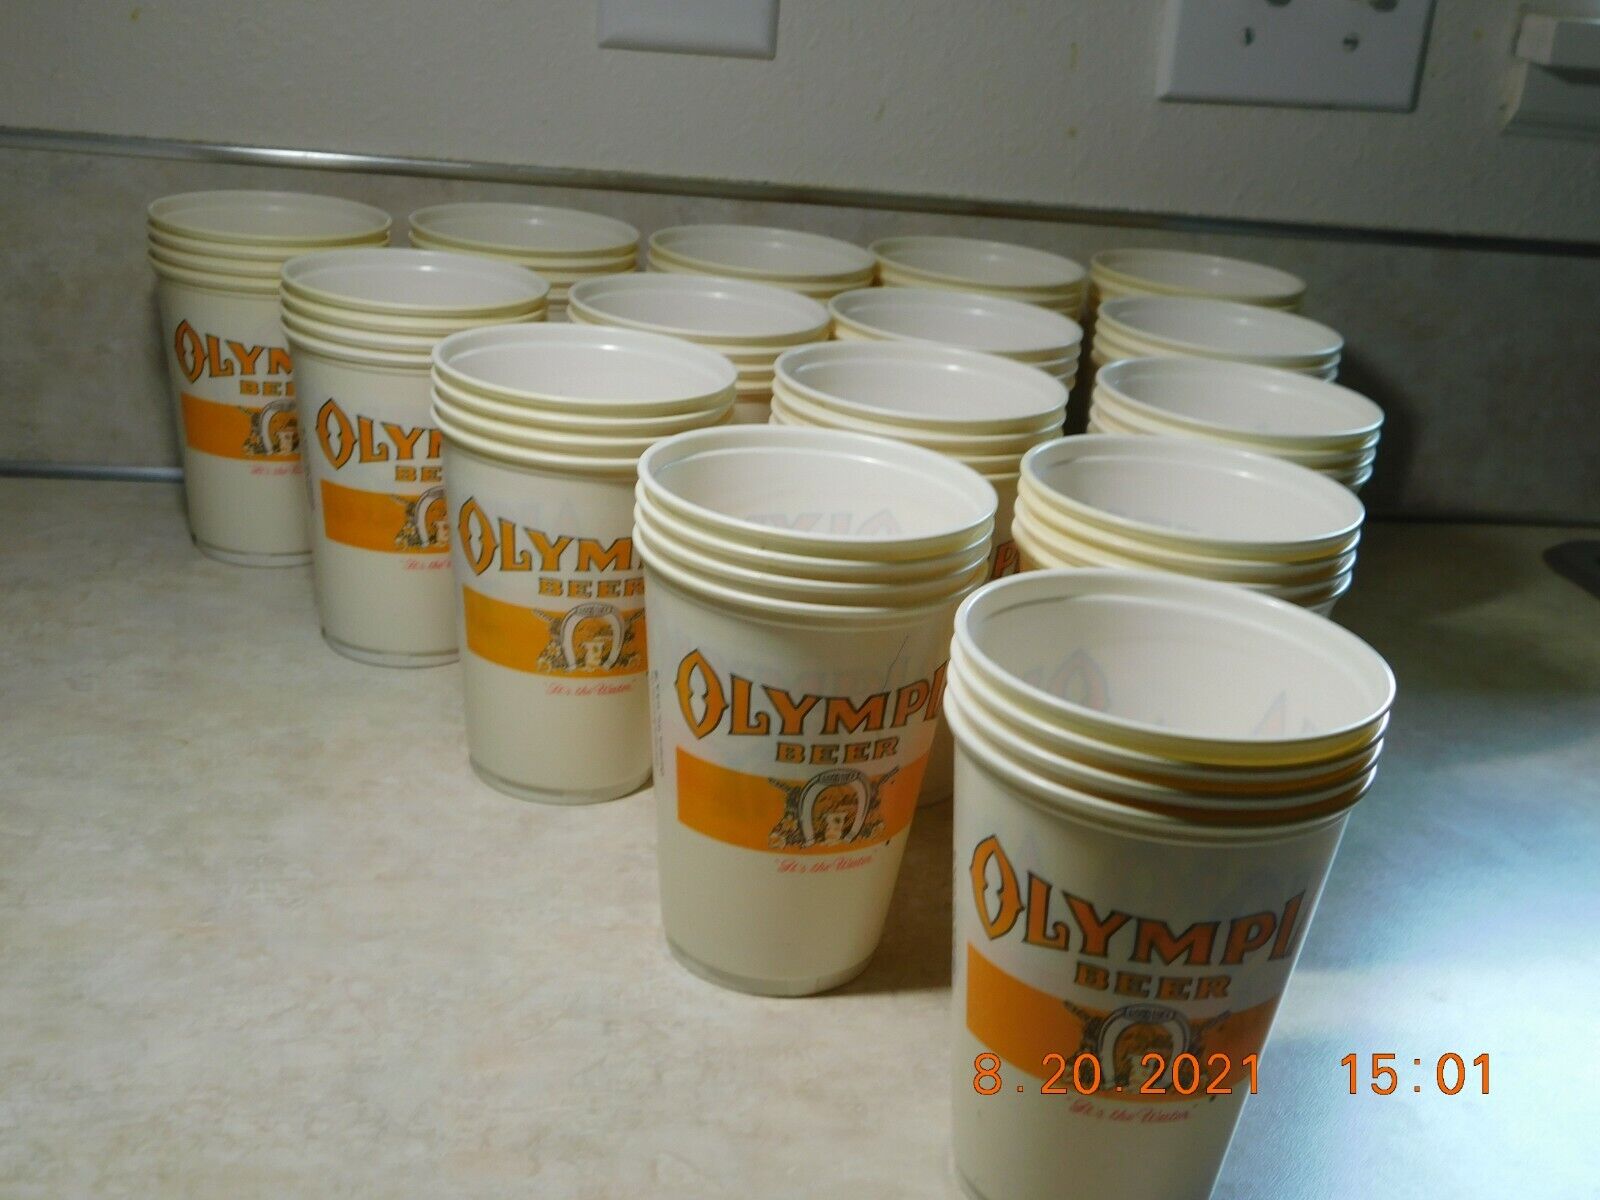 70's 80's OLYMPIA BEER Keg "It's the Water" Cups 12 oz SOLO NEW Unused  Без бренда - фотография #6